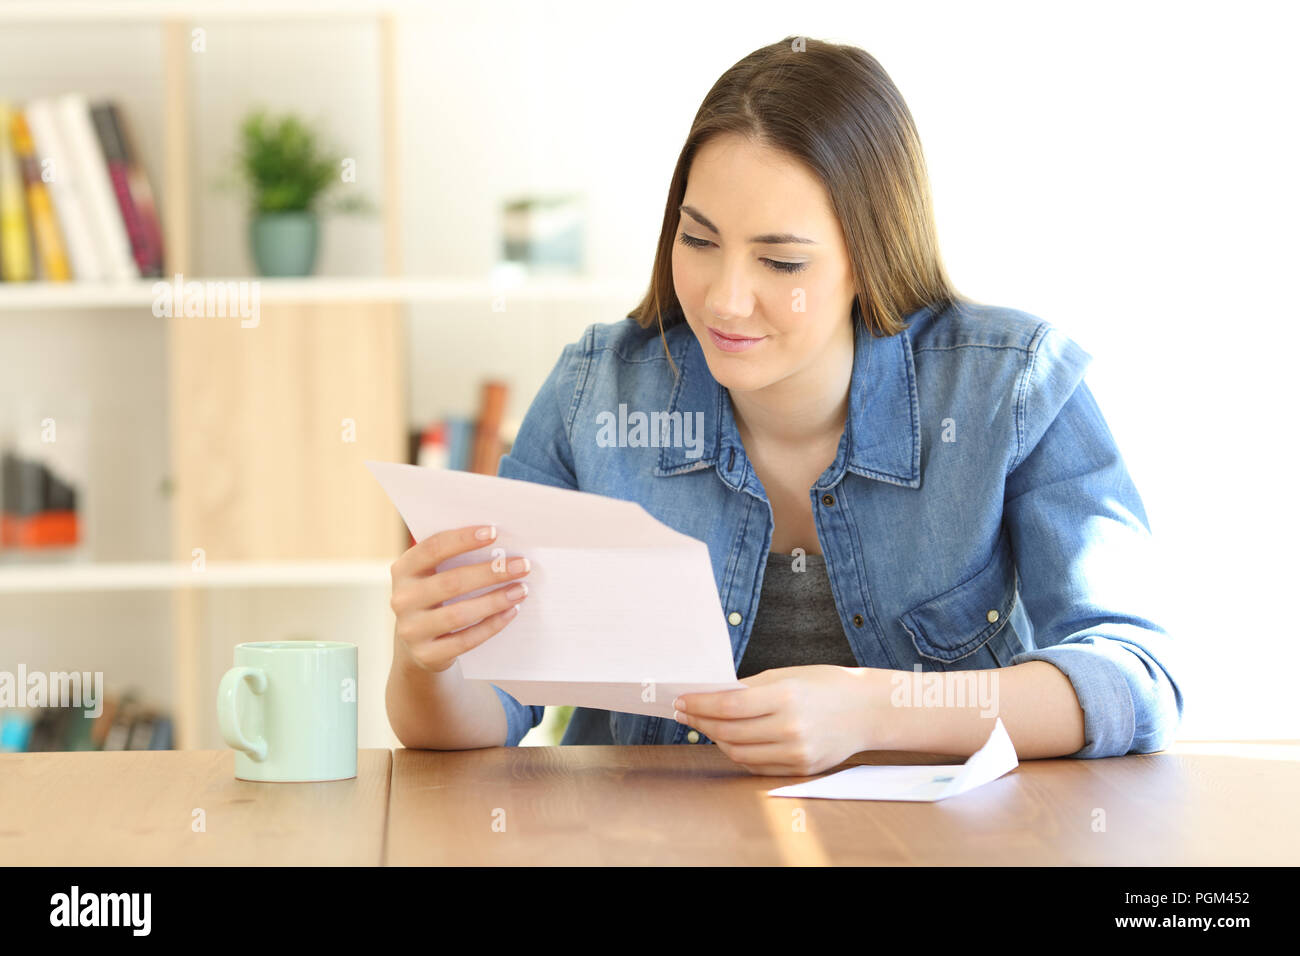 Relaxed lady reading a letter on a table at home Stock Photo